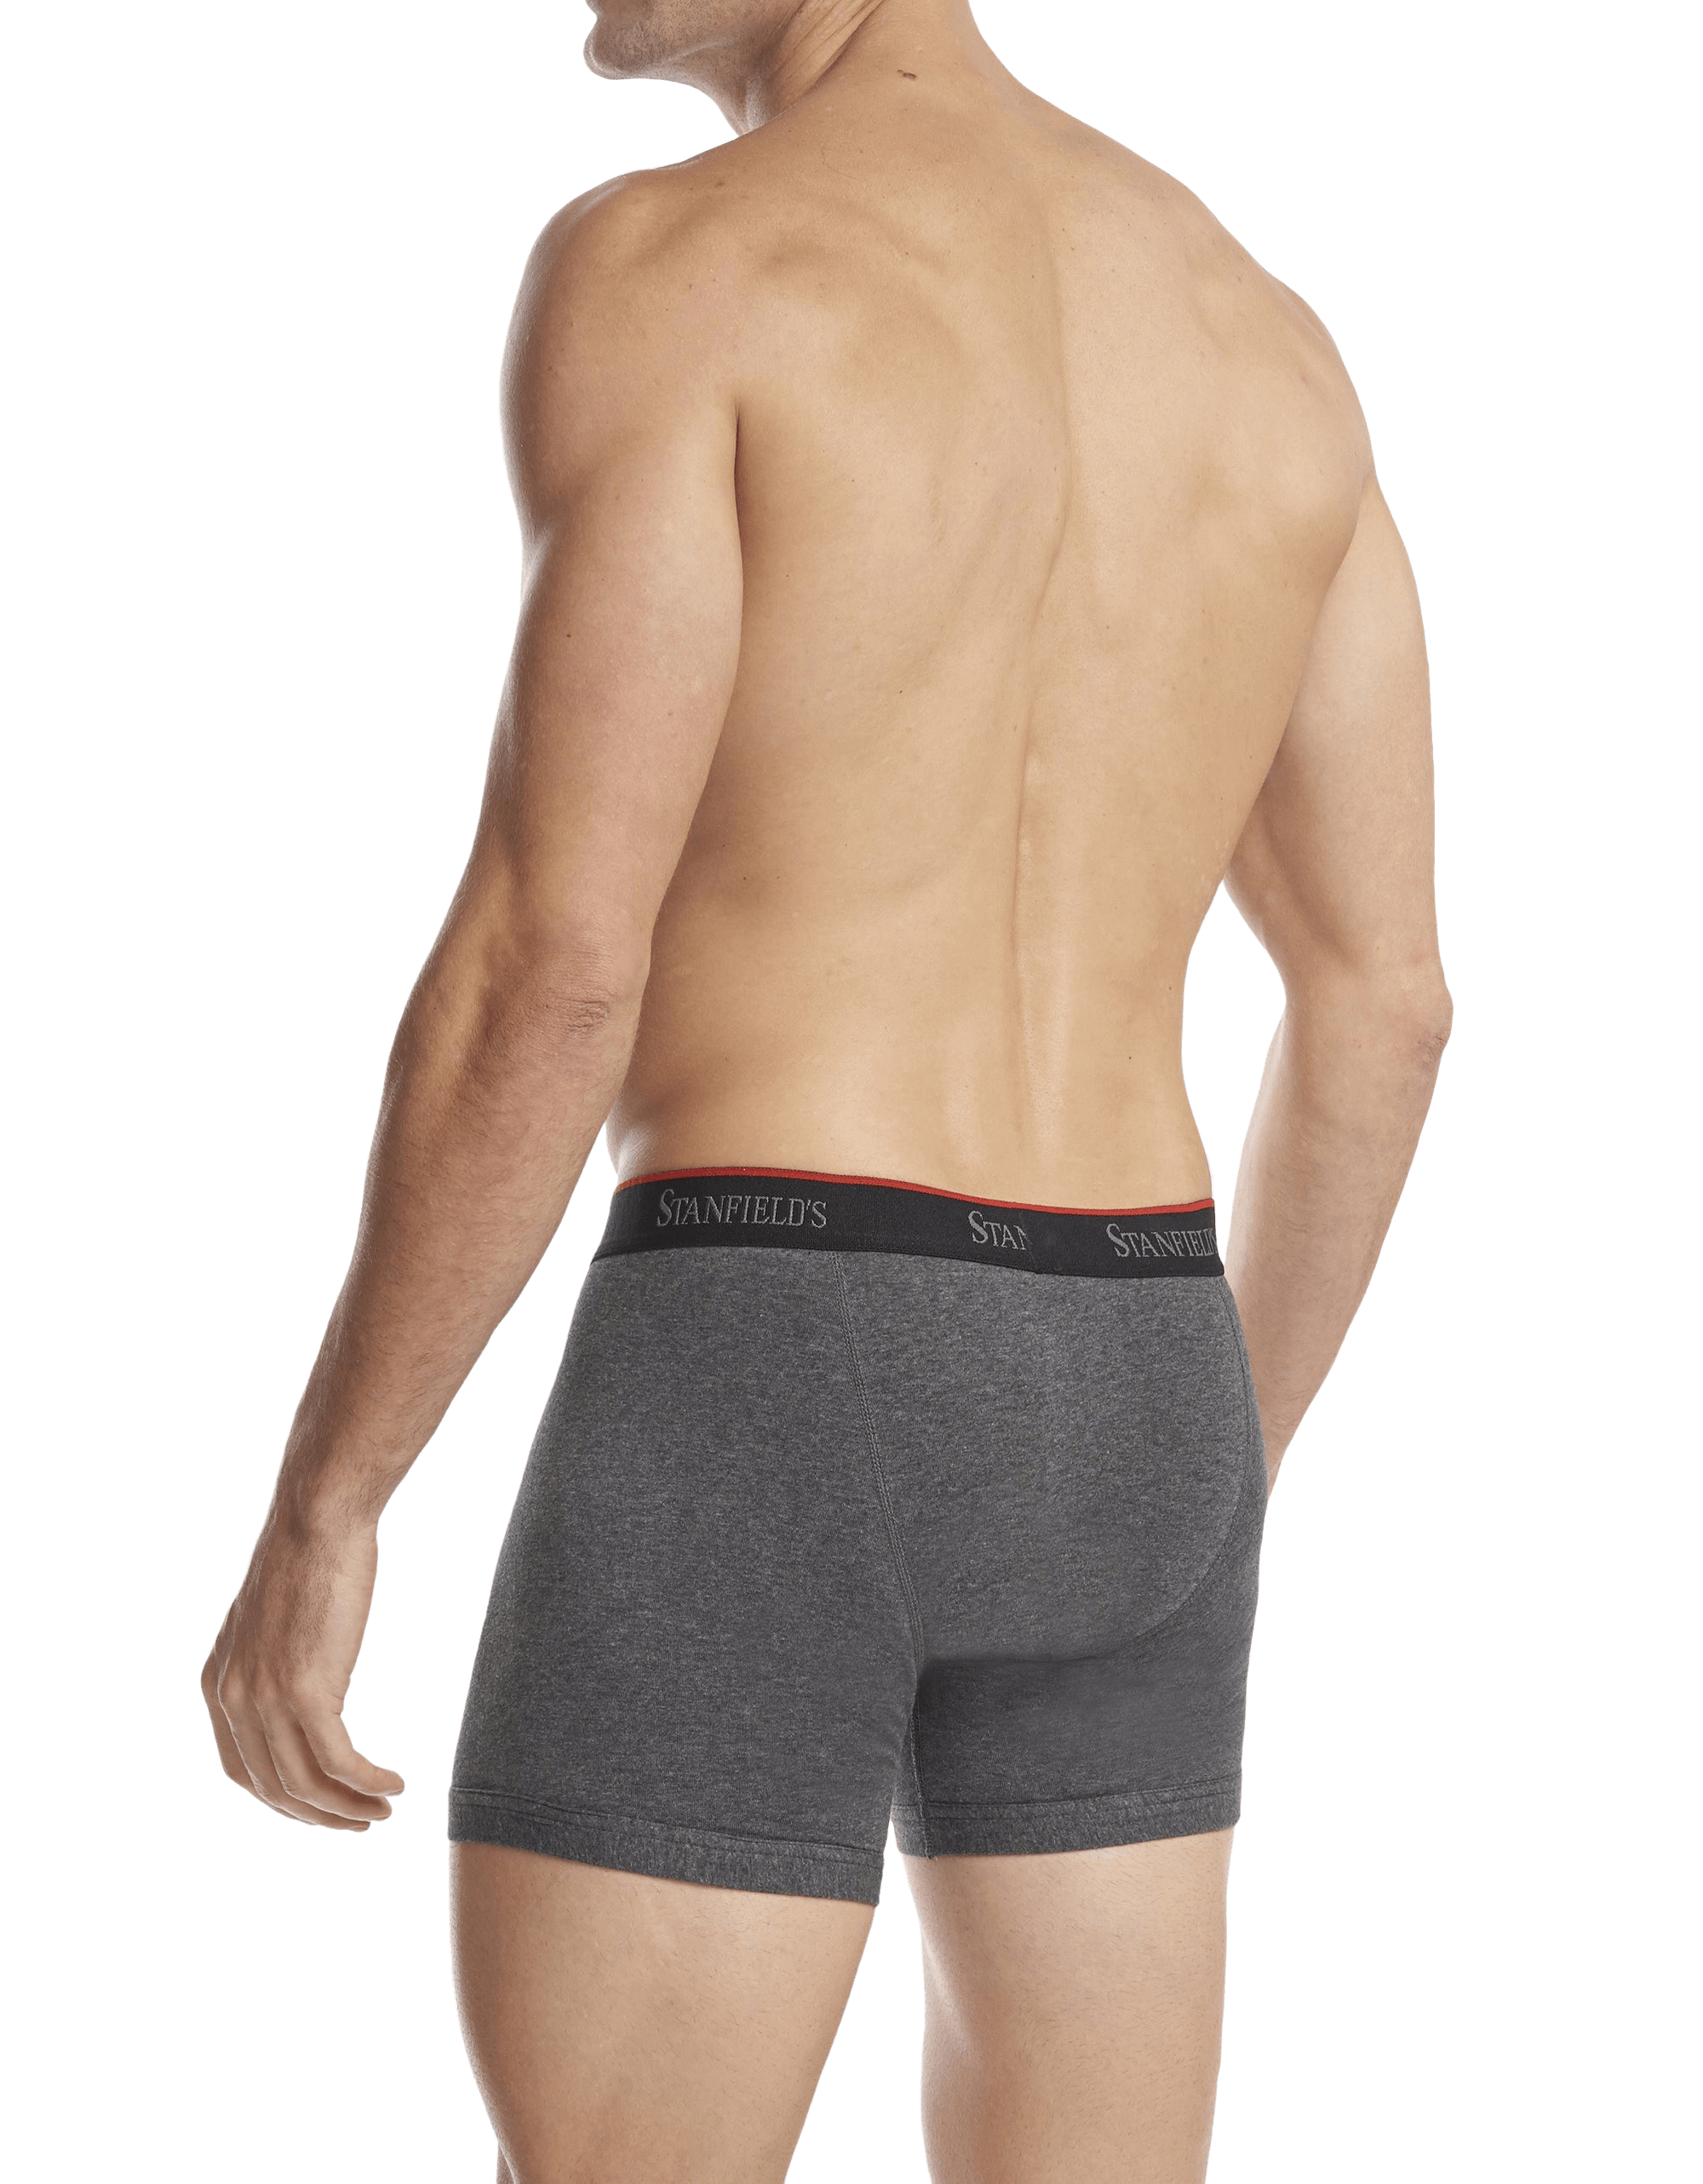 Buy Men's Briefs with Elasticised Waistband - Set of 3 Online